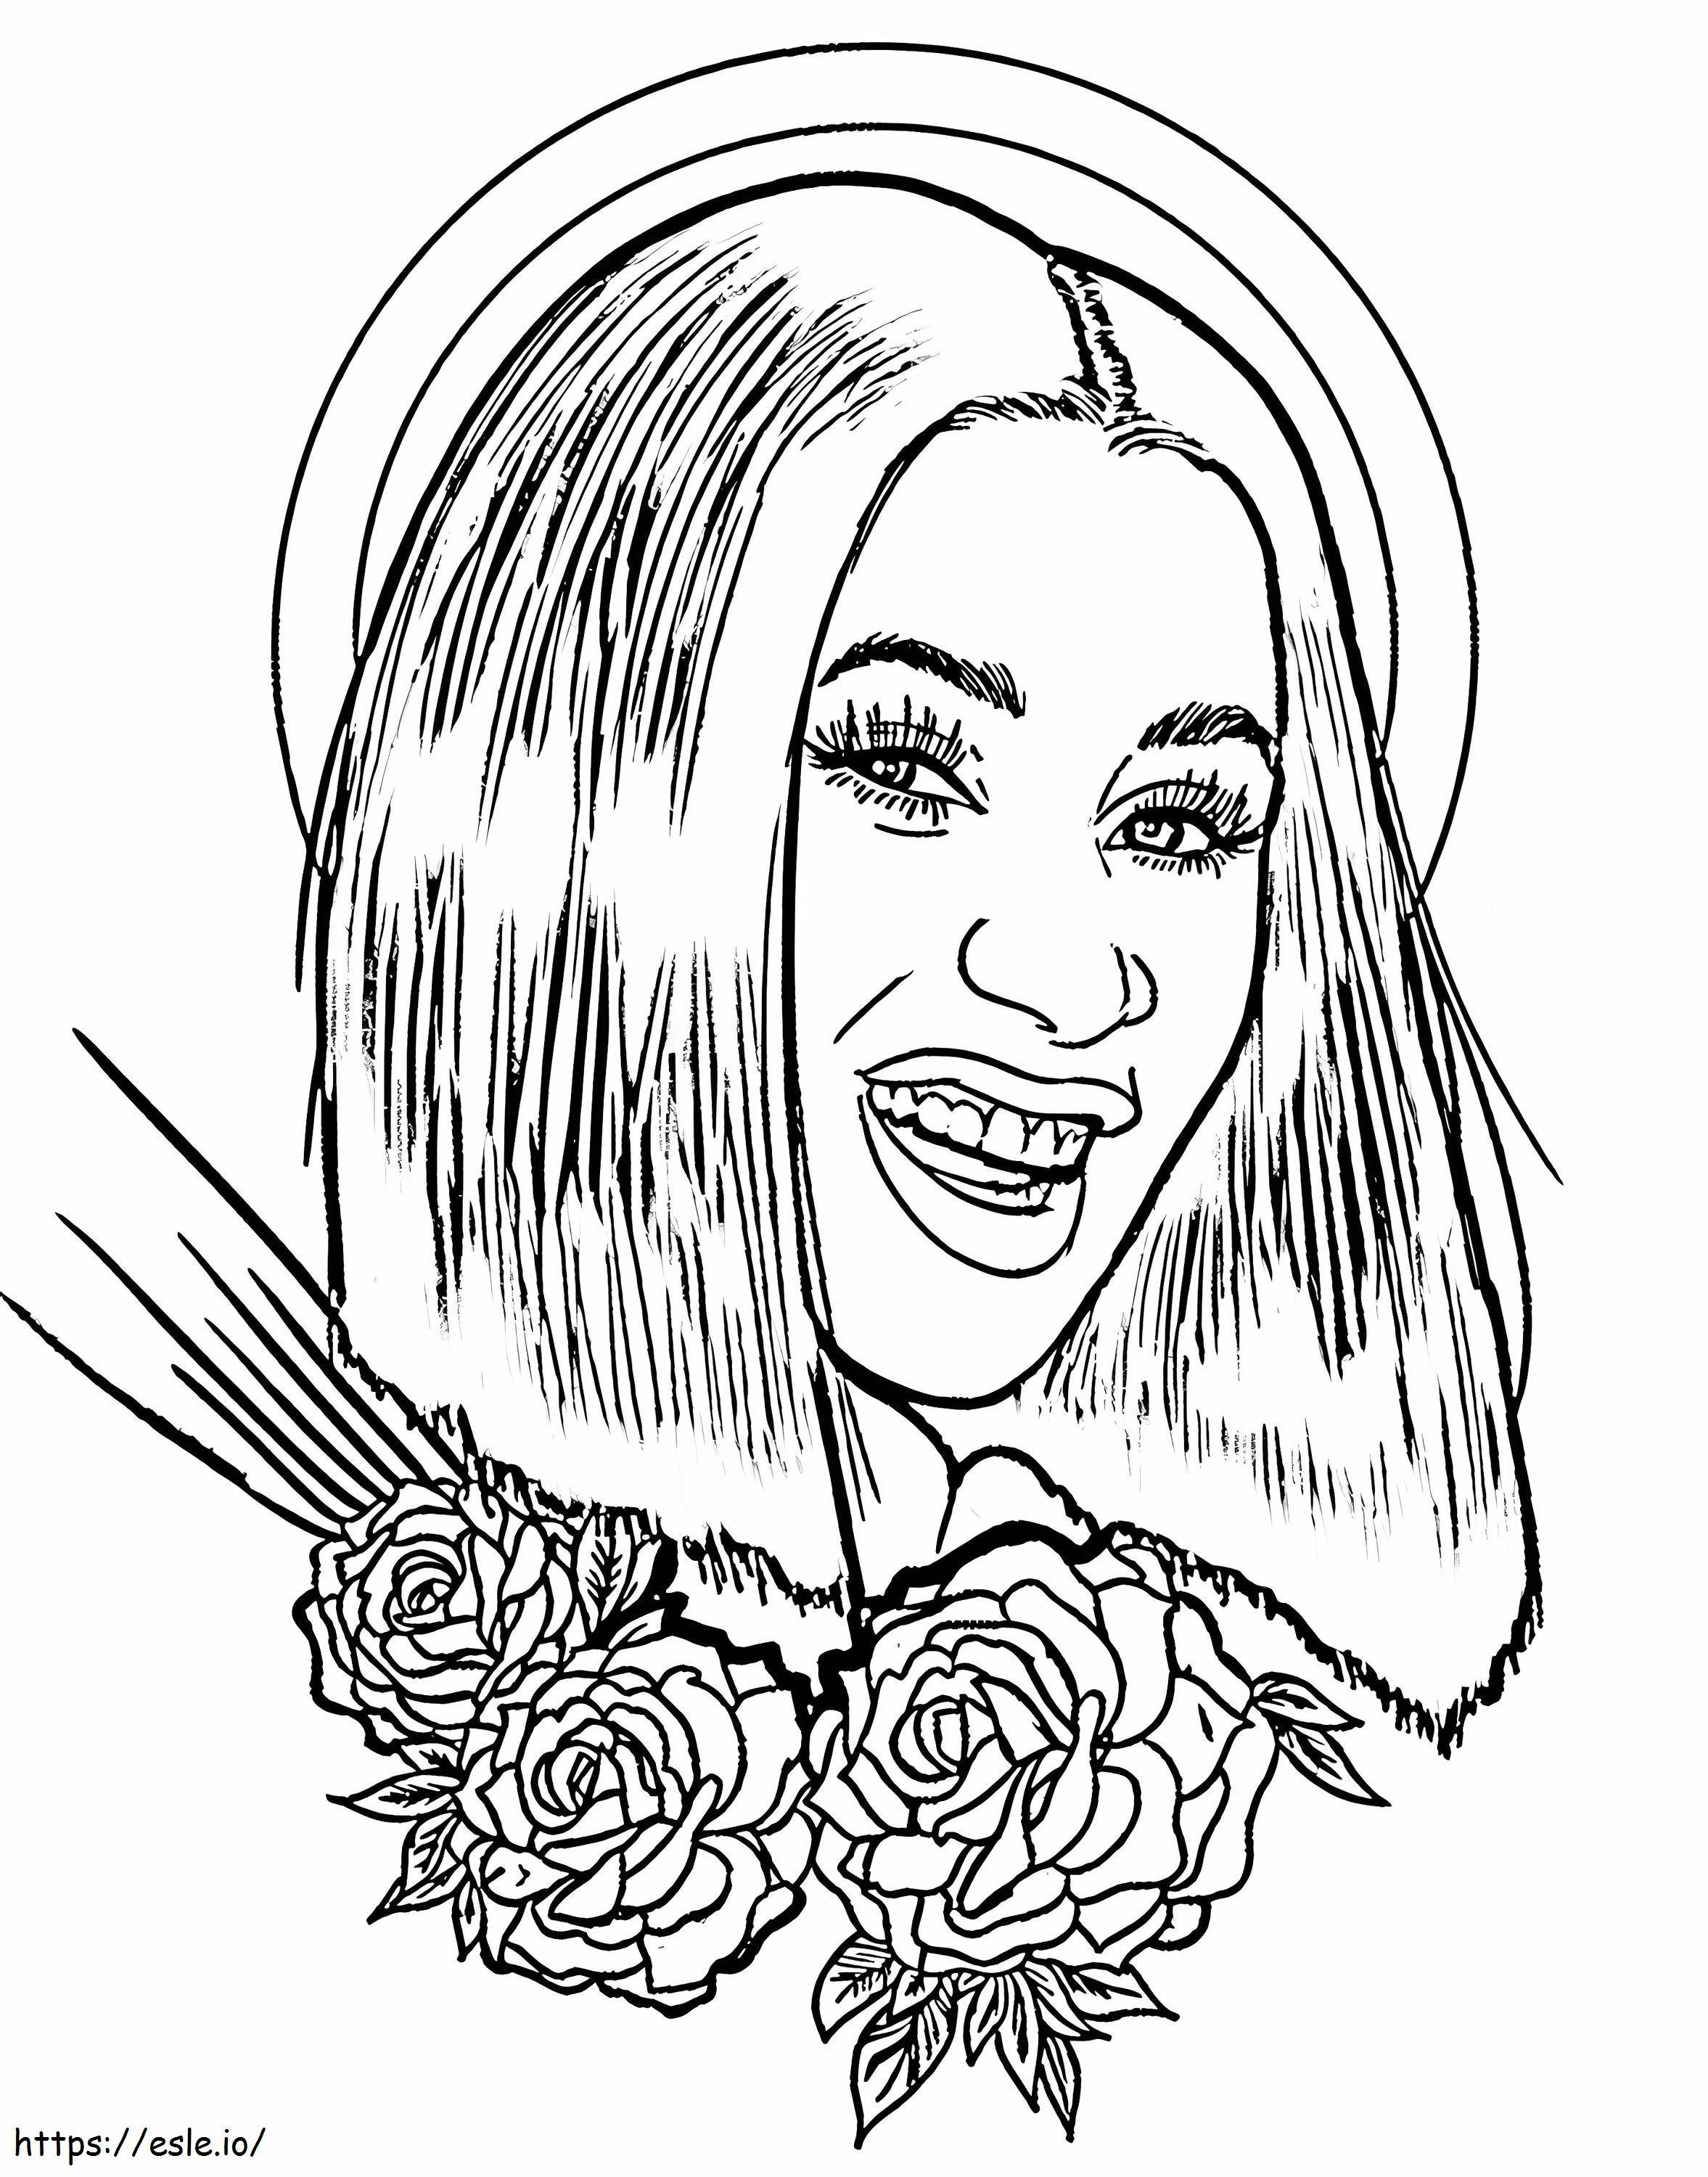 Cardi B With Flowers coloring page